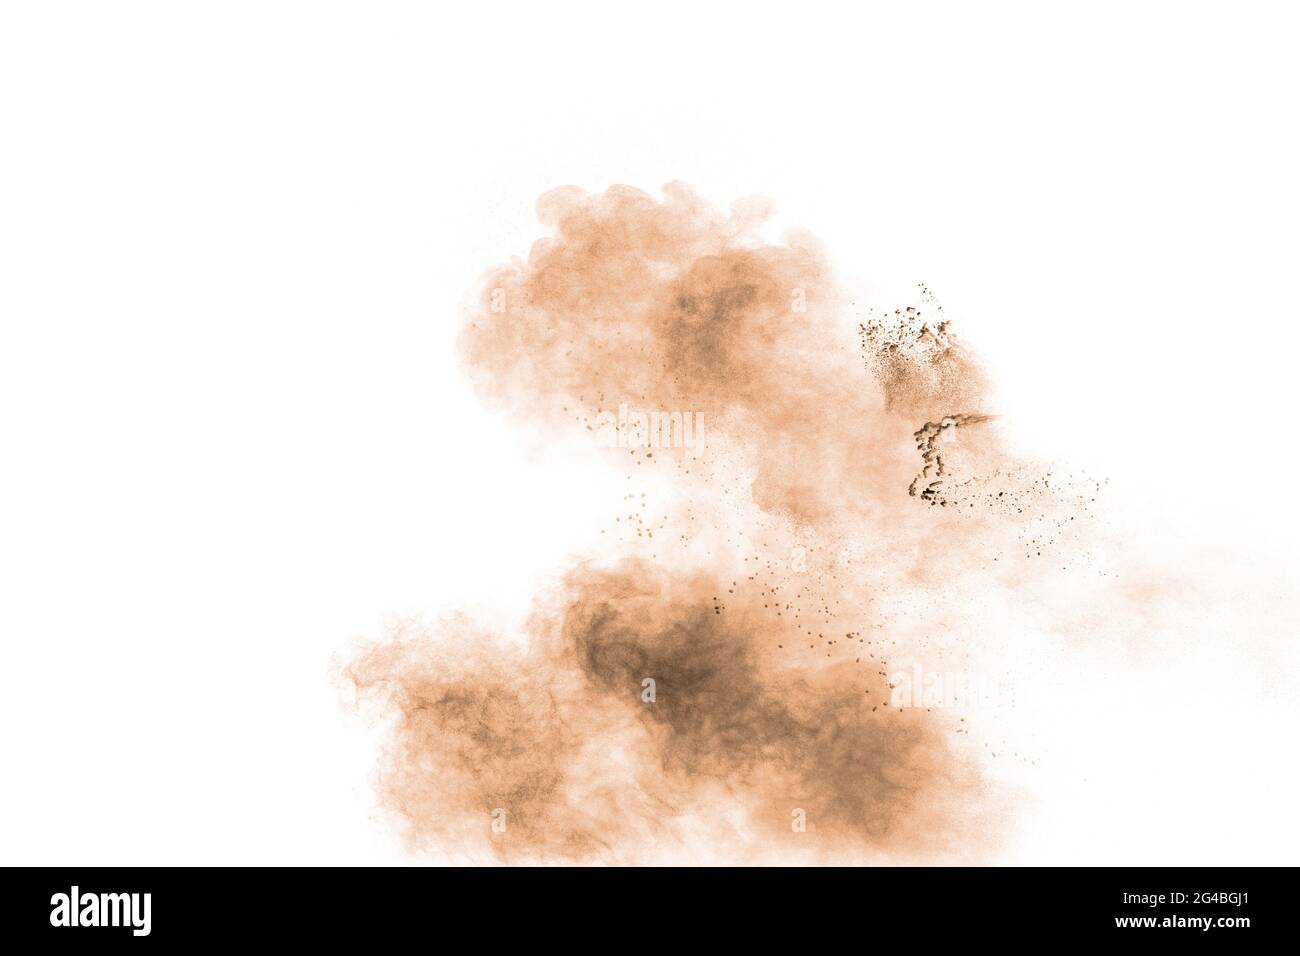 Freeze motion of brown powder exploding. Abstract design of brown dust cloud against white background. Stock Photo